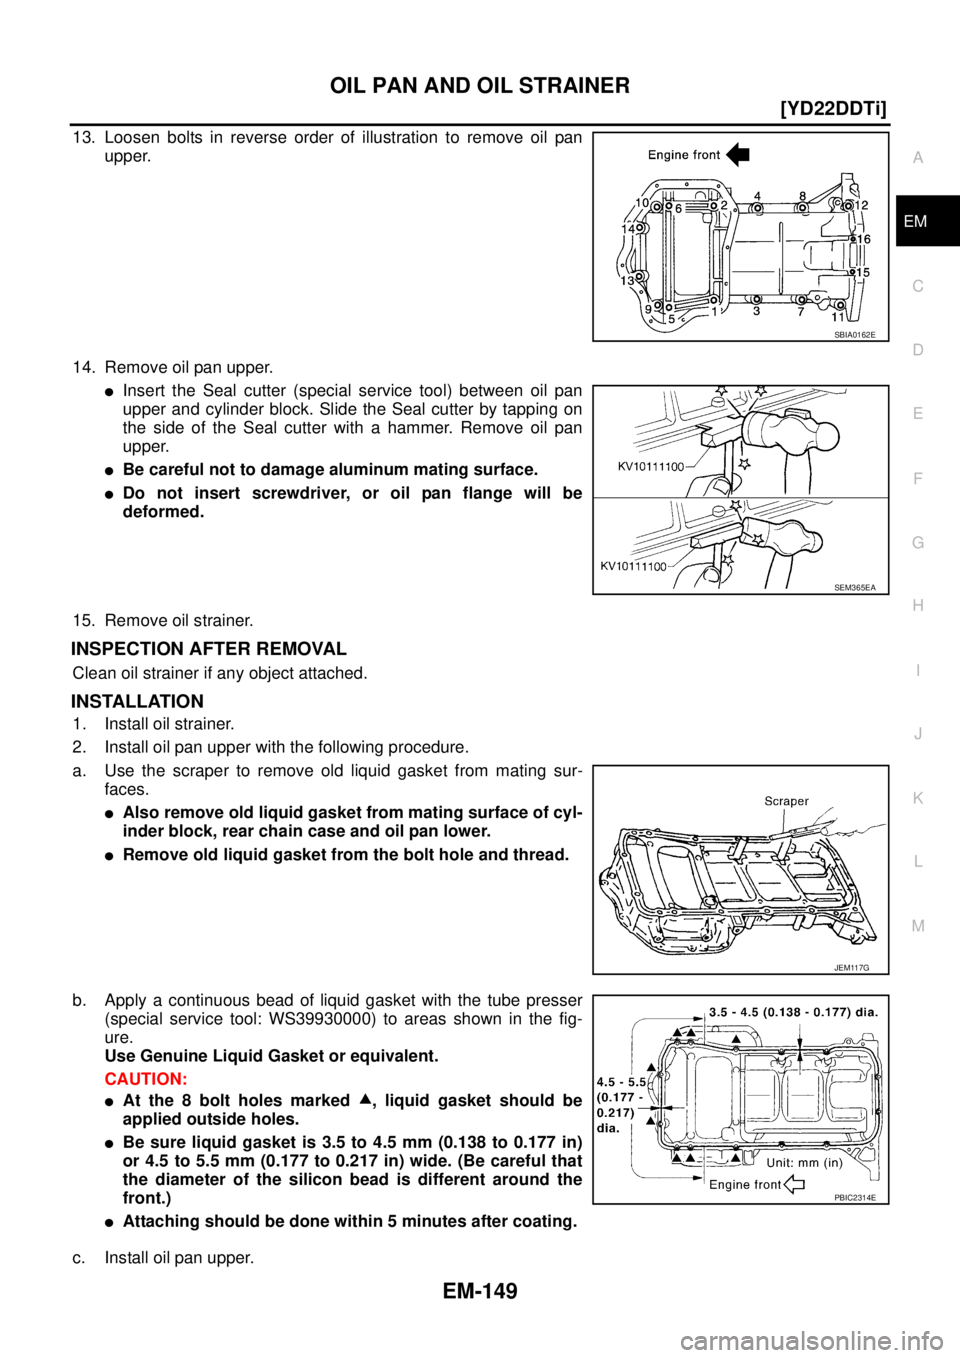 NISSAN X-TRAIL 2003  Service Owners Manual OIL PAN AND OIL STRAINER
EM-149
[YD22DDTi]
C
D
E
F
G
H
I
J
K
L
MA
EM
 
13. Loosen bolts in reverse order of illustration to remove oil pan
upper.
14. Remove oil pan upper.
Insert the Seal cutter (spe